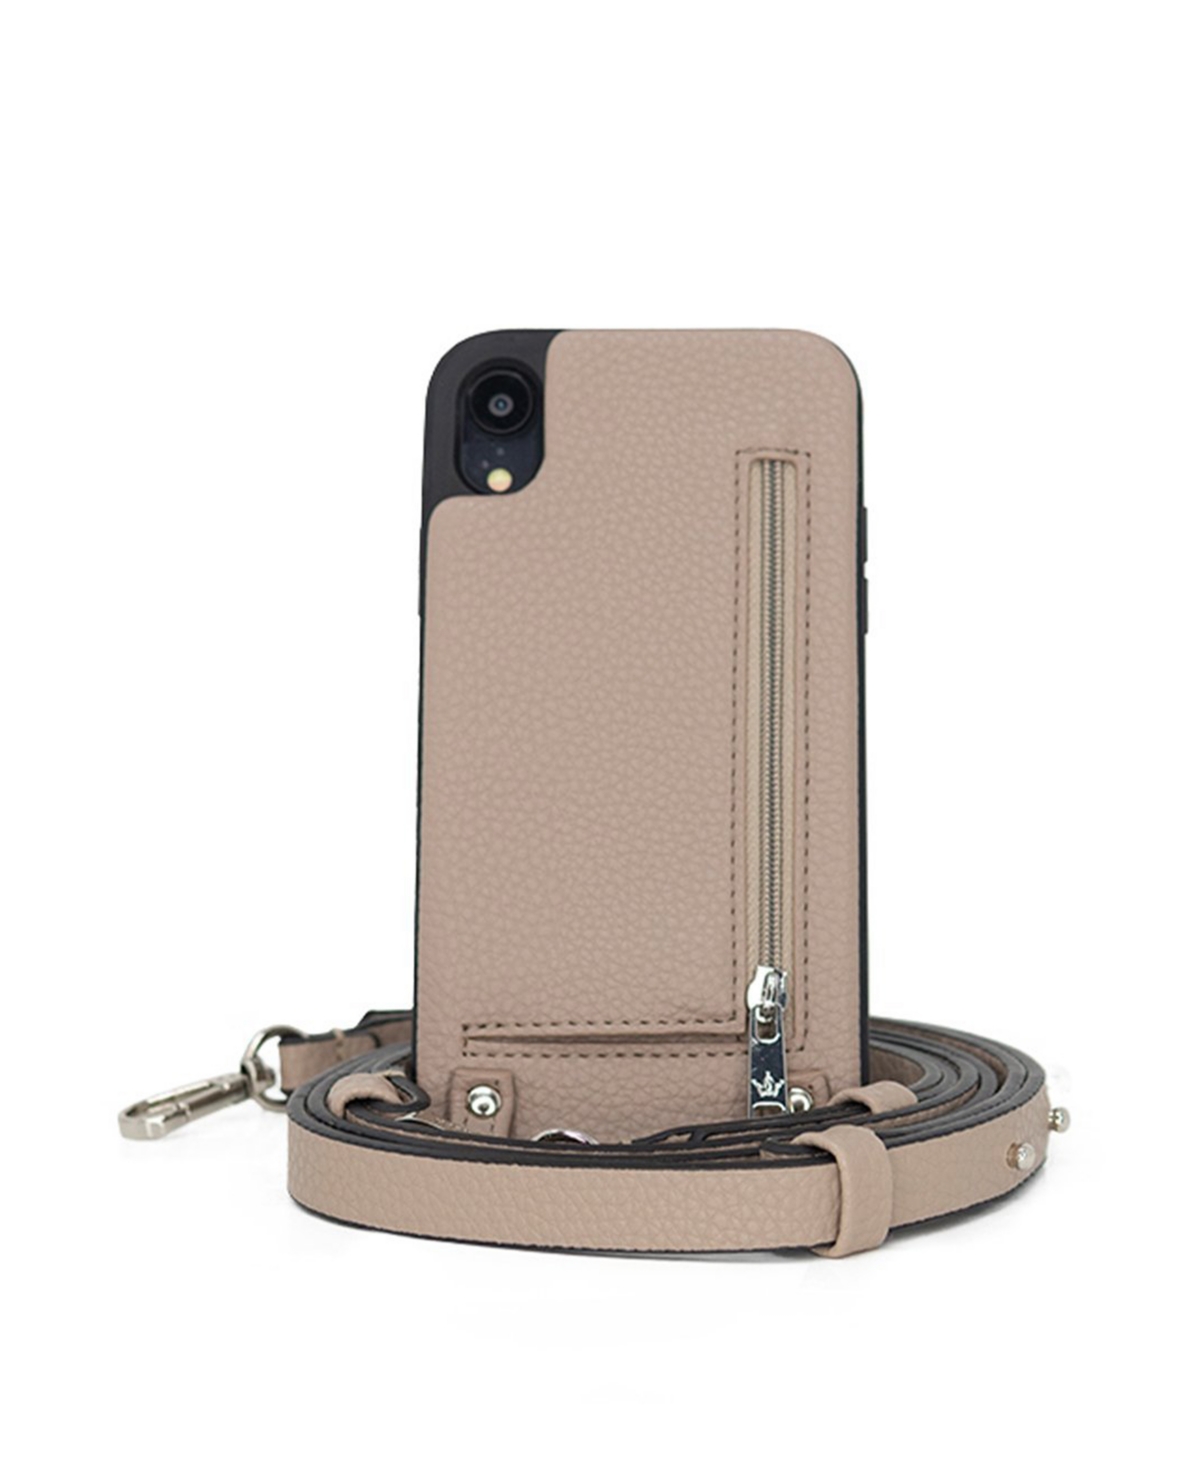 Crossbody Xr IPhone Case with Strap Wallet - Taupe